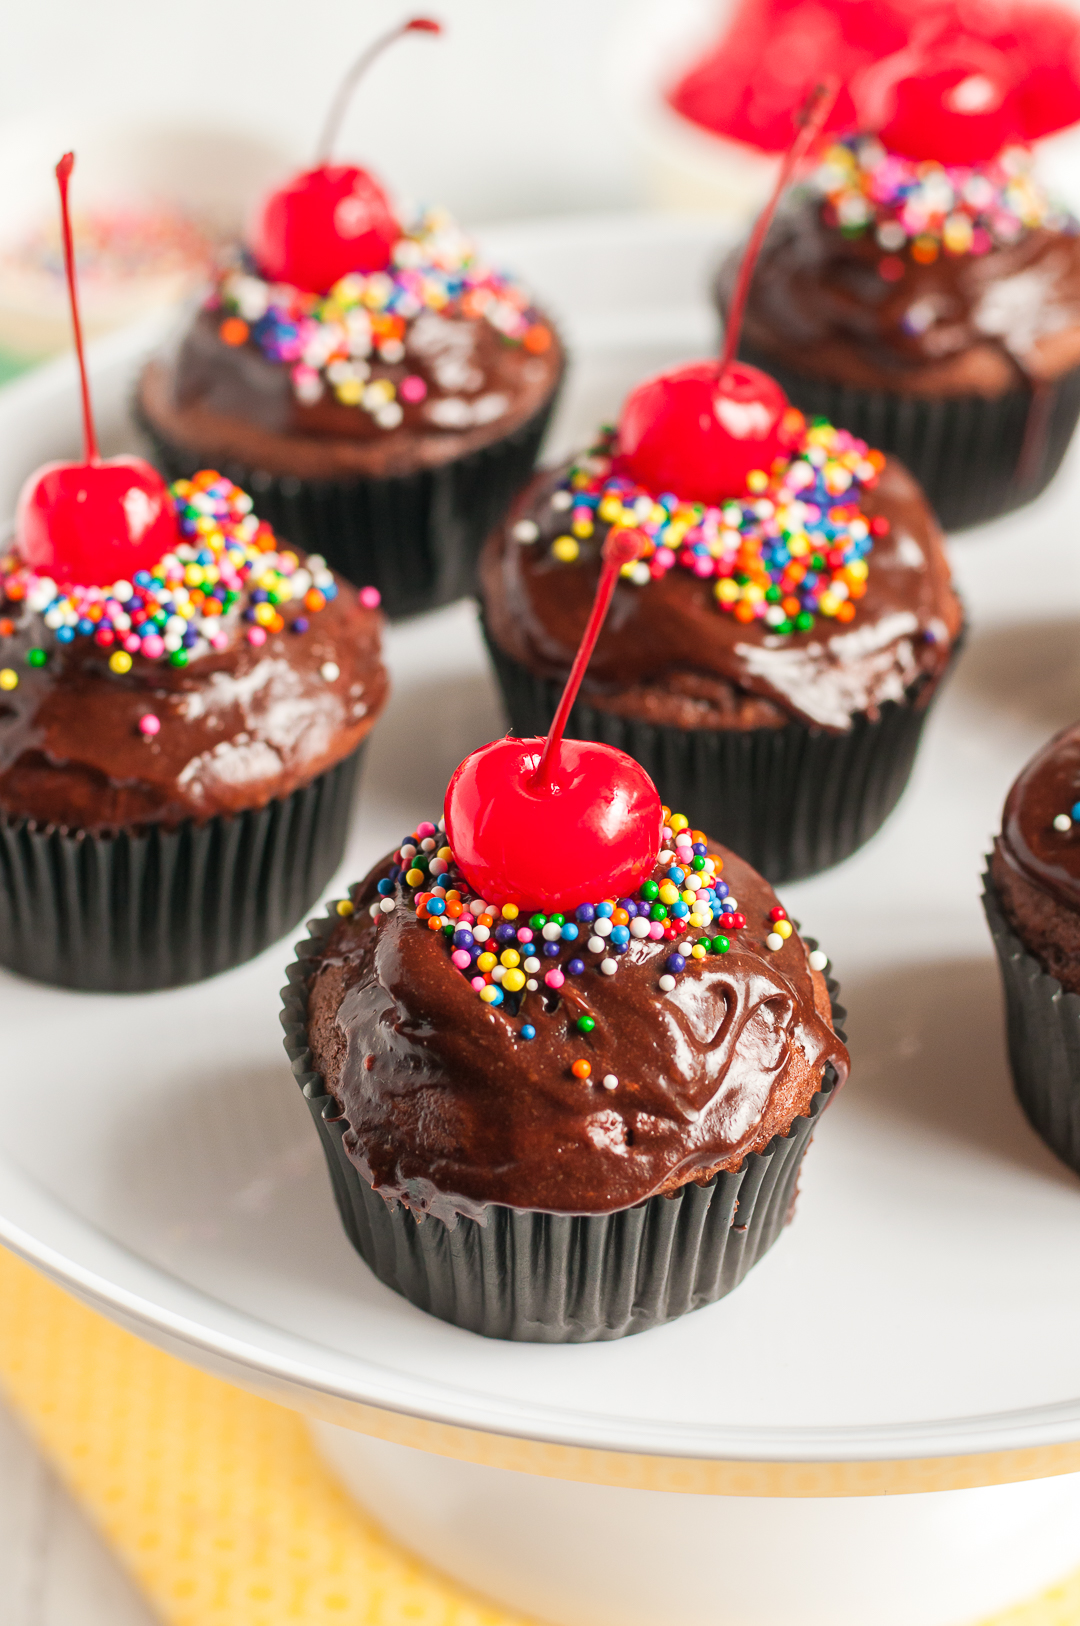 Chocolate cupcakes with big cherries on top.